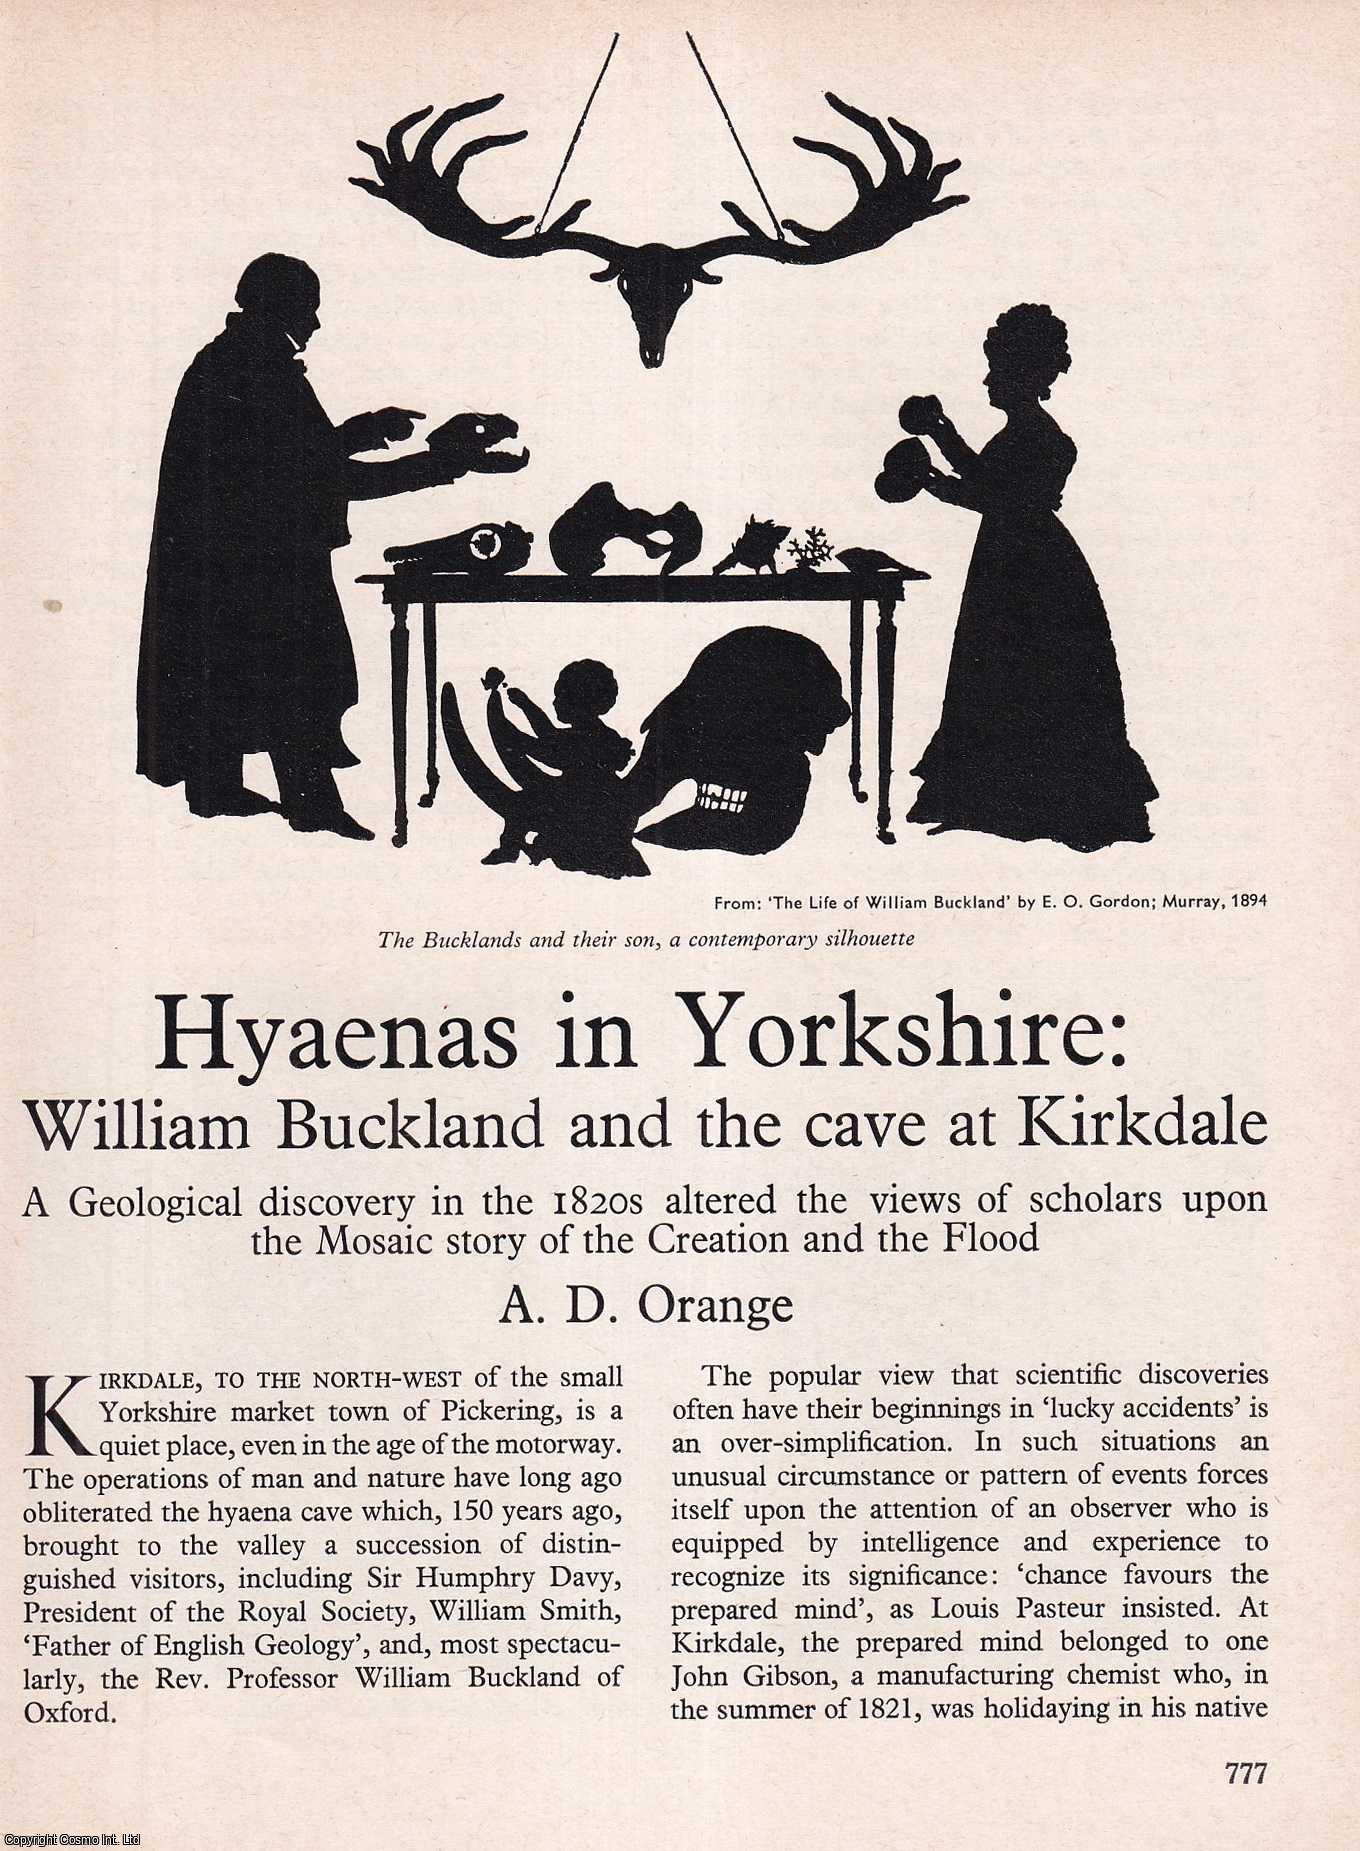 A.D. Orange - Hyaenas in Yorkshire: William Buckland and The Cave at Kirkdale. An original article from History Today magazine, 1972.